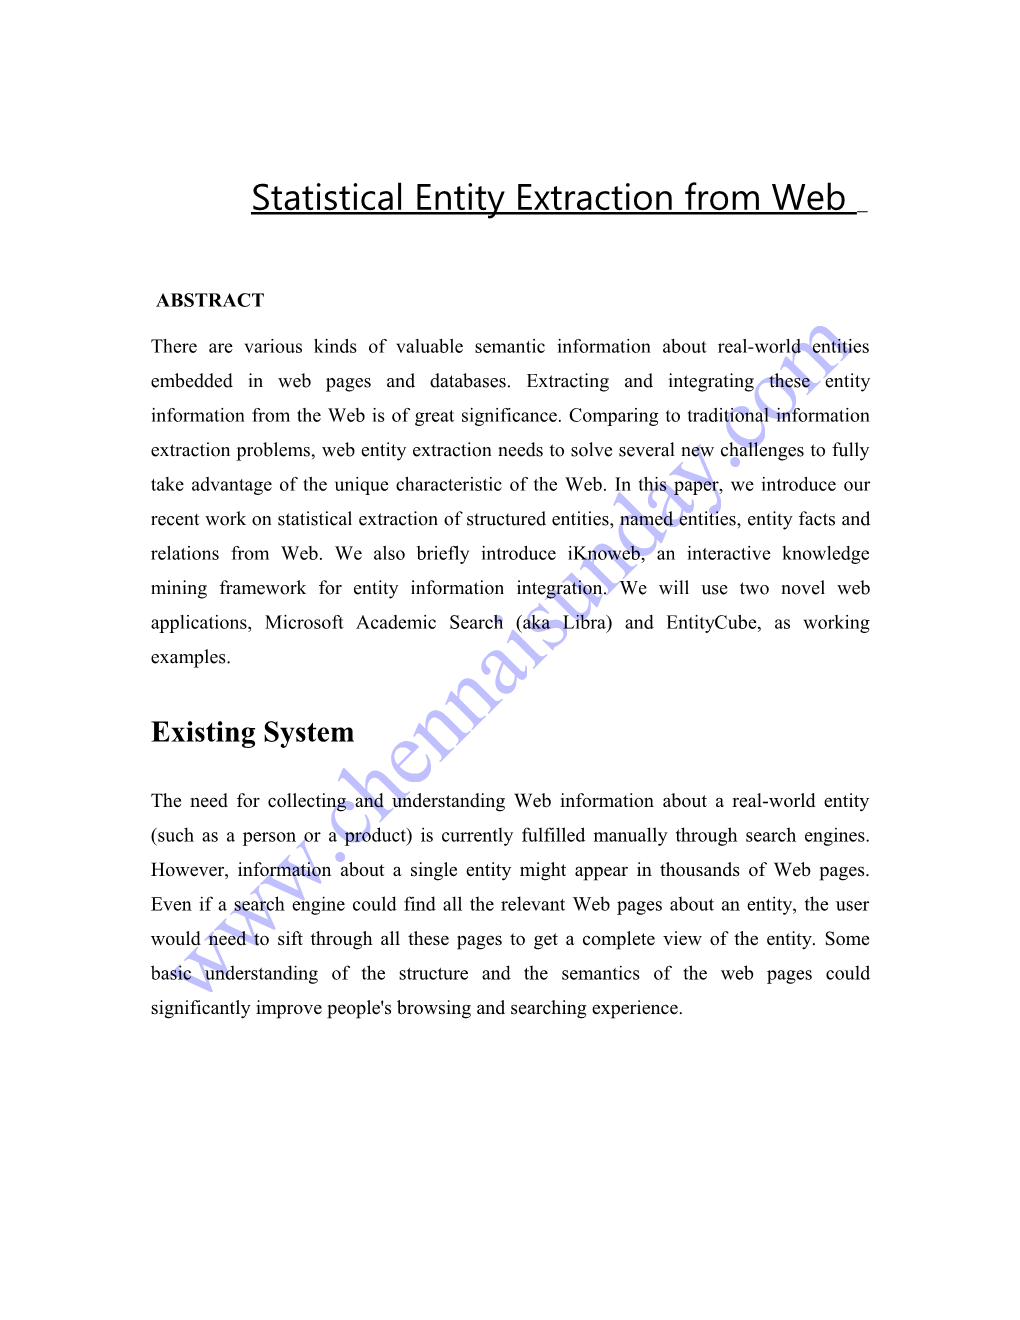 Statistical Entity Extraction from Web